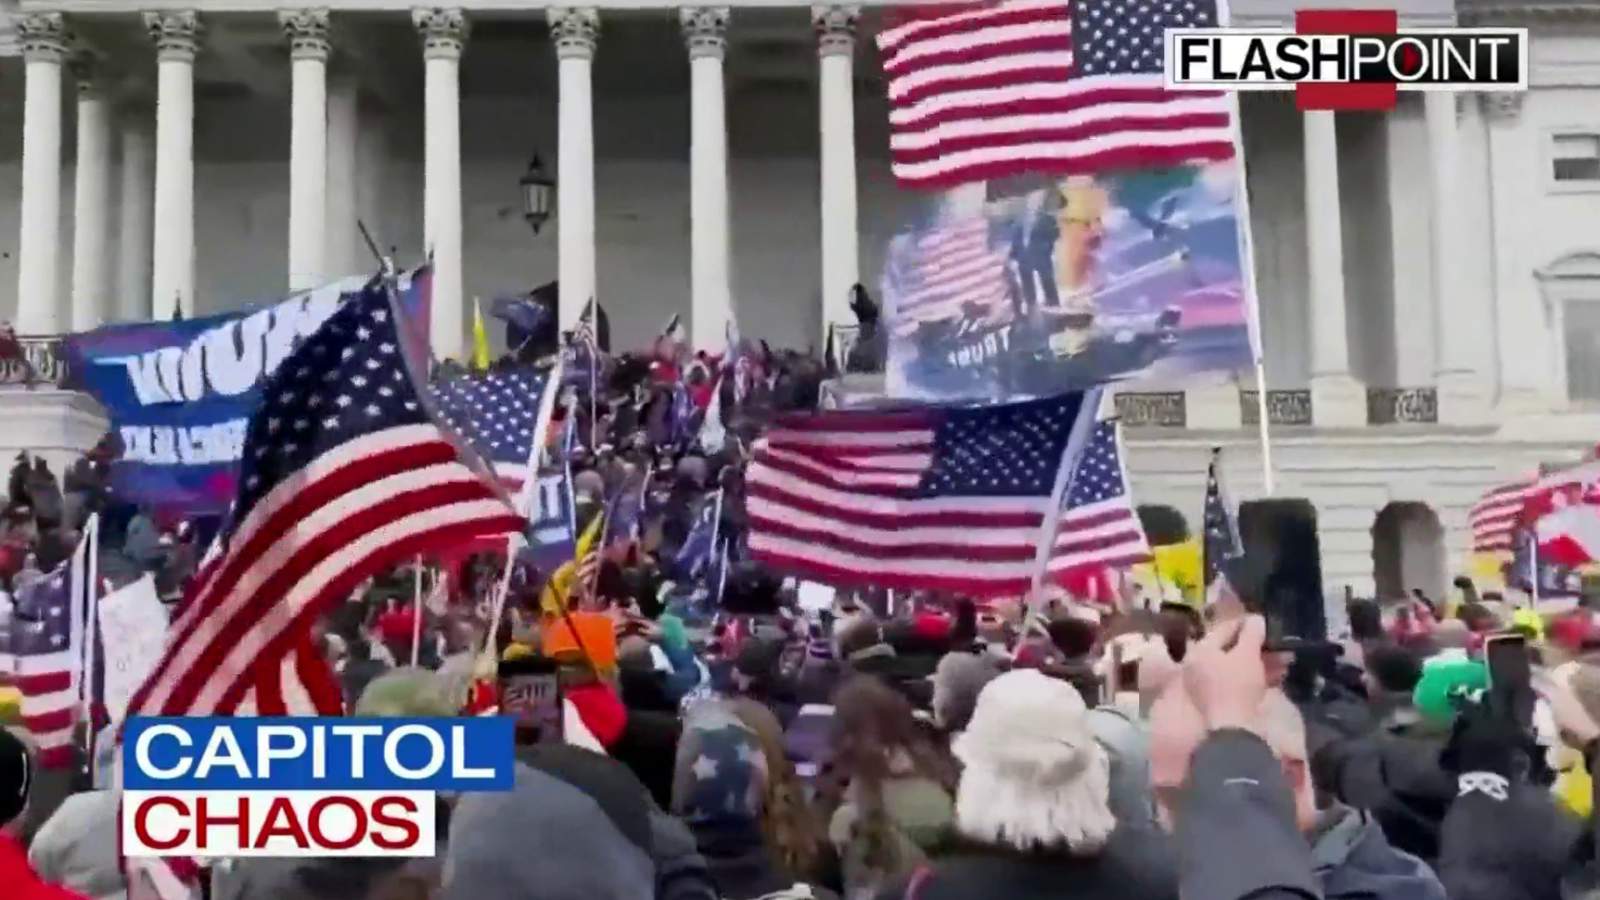 Flashpoint 1/10/21: Chaos on Capitol Hill after Trump supporters storm halls of Congress to overturn election